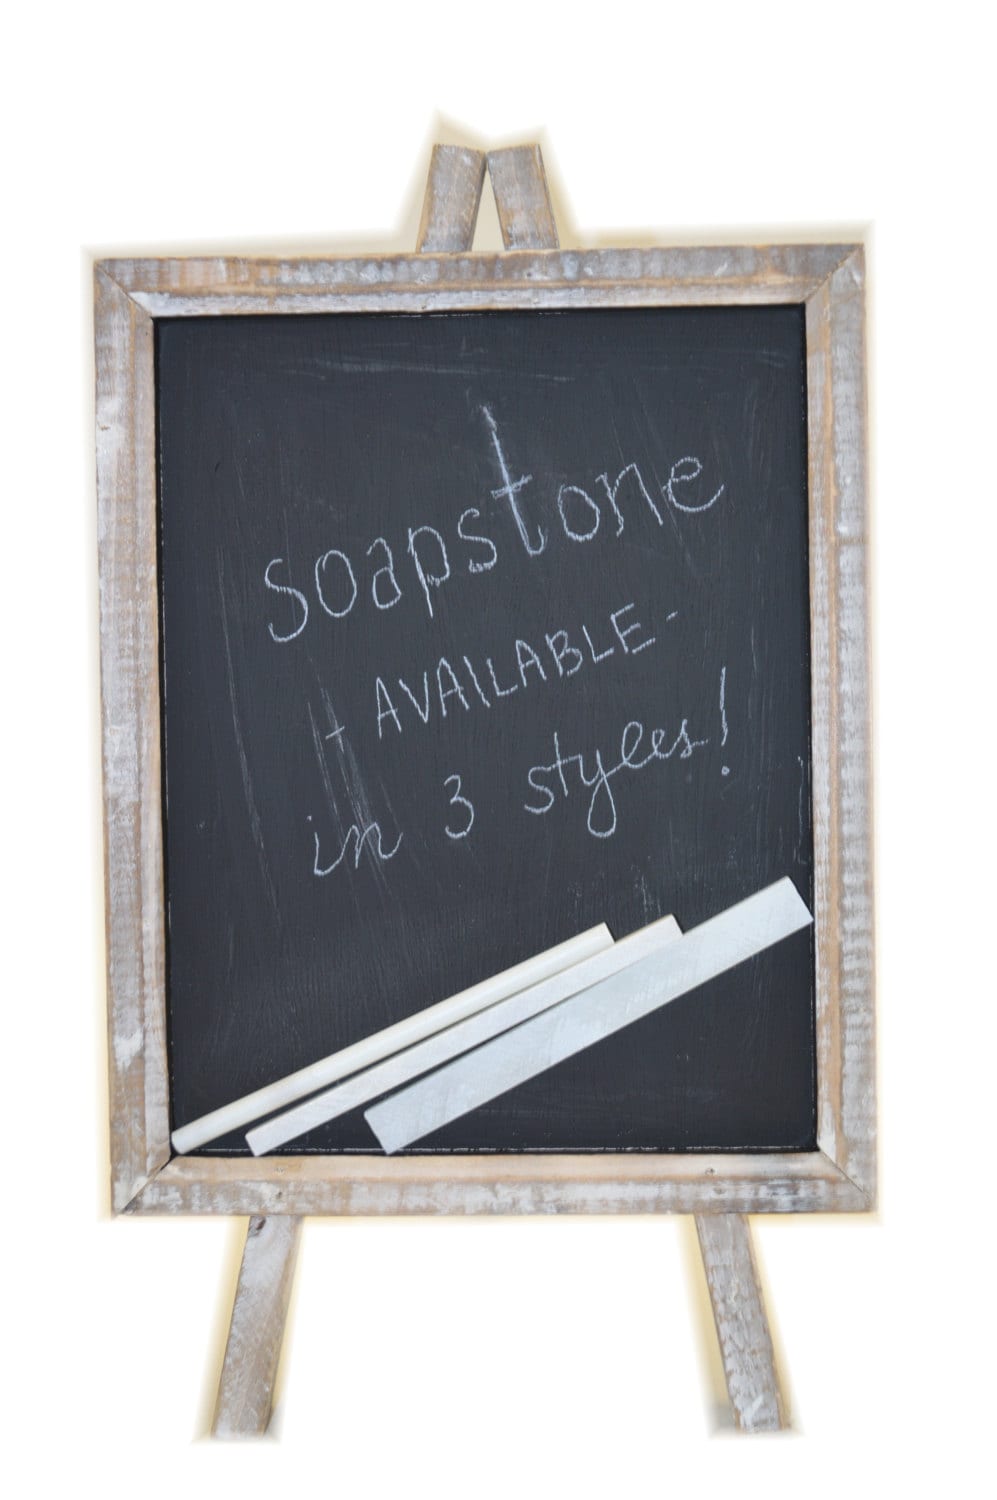 The Best Chalk for Chalkboards SOAPSTONE Available in Three Styles